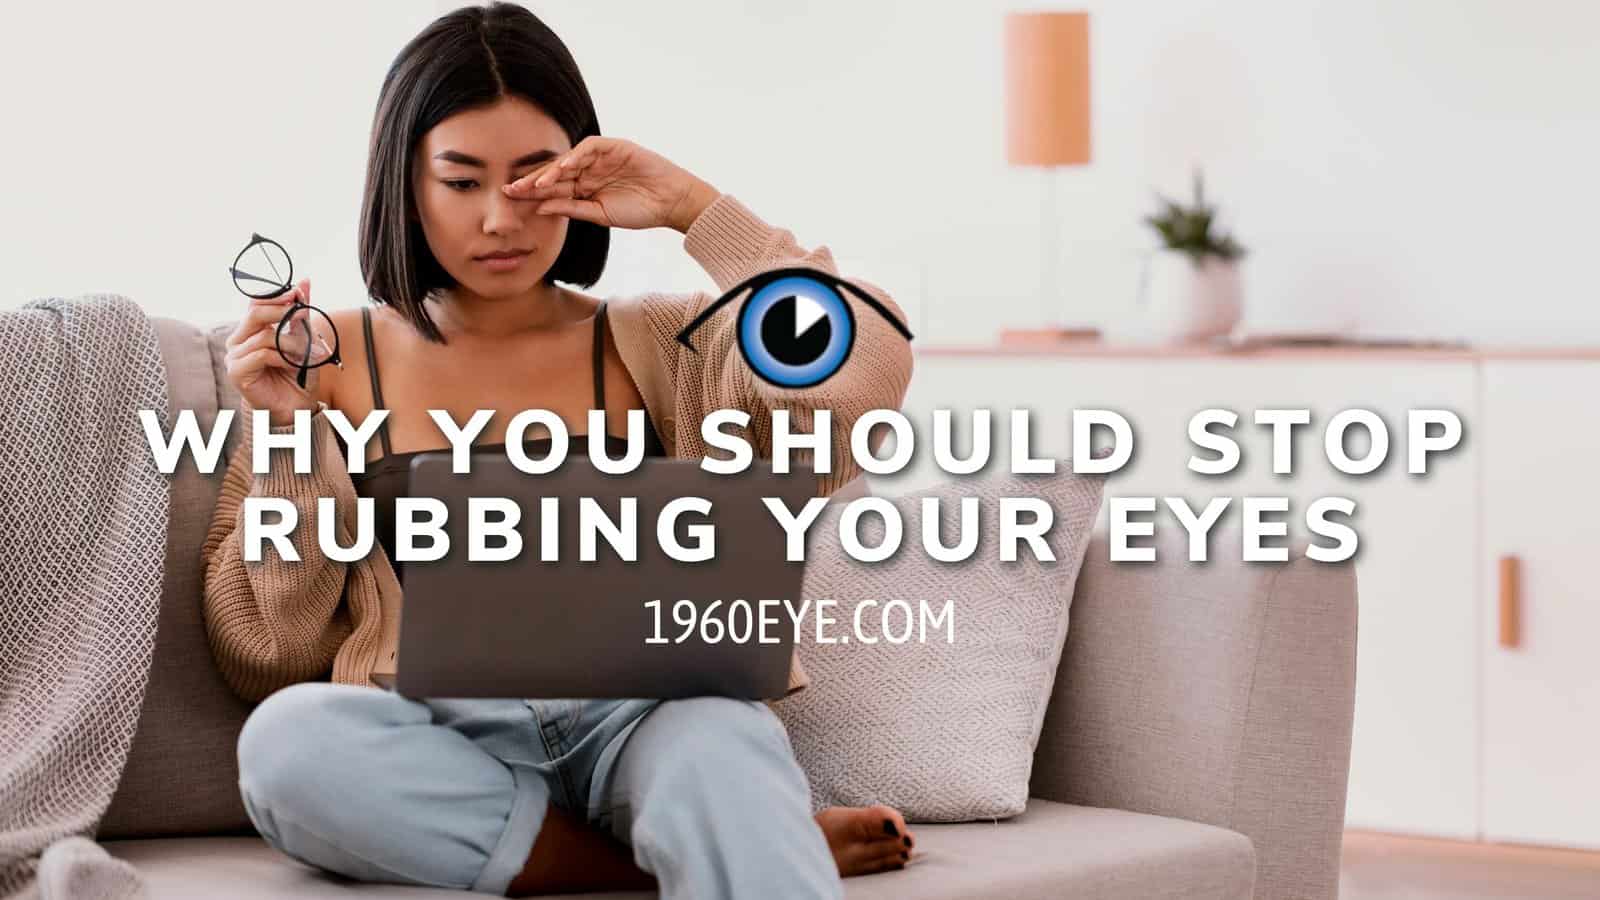 Why You Should Stop Rubbing Your Eyes